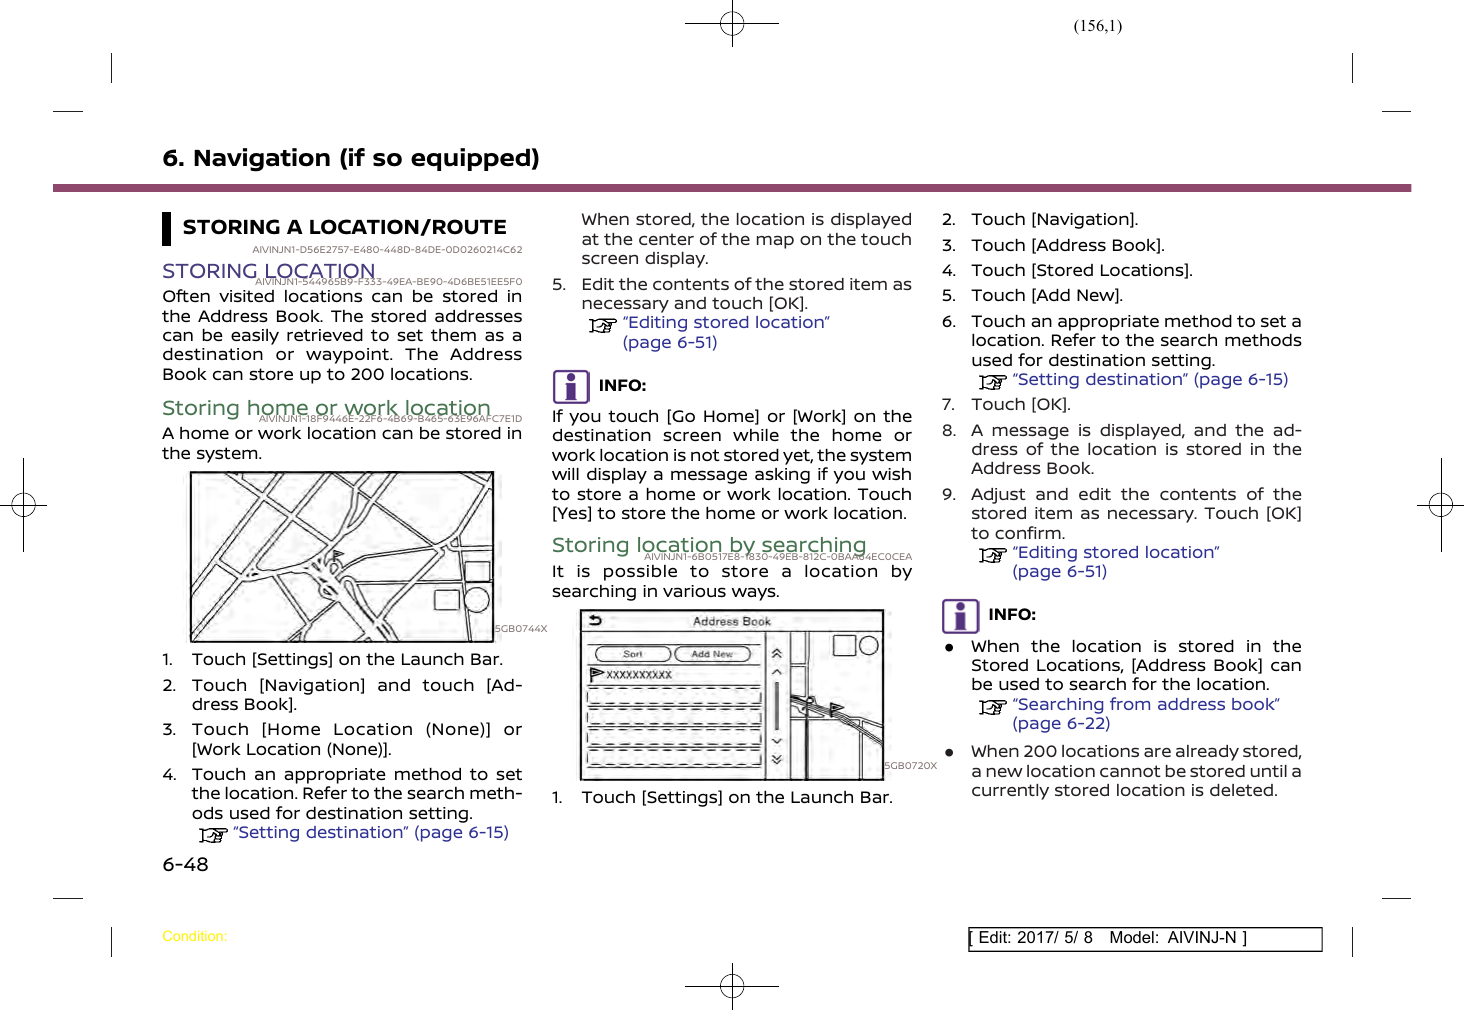 Page 156 of Robert Bosch Car Multimedia AIVICMFB0 Navigation System with Bluetooth and WLAN User Manual